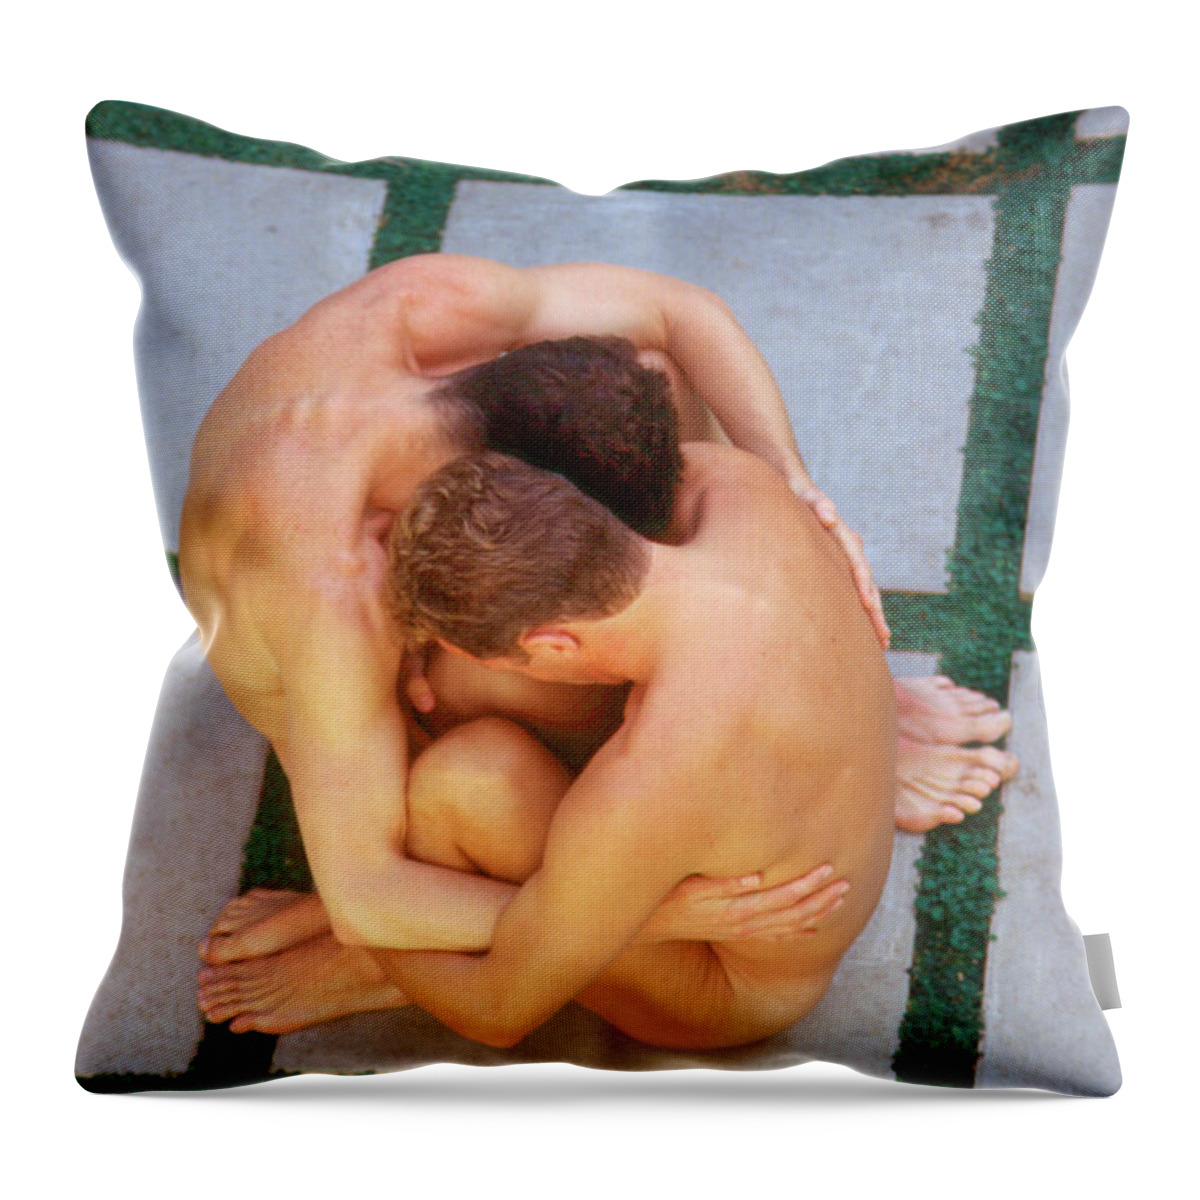 Male Throw Pillow featuring the photograph Group 2 by Andy Shomock